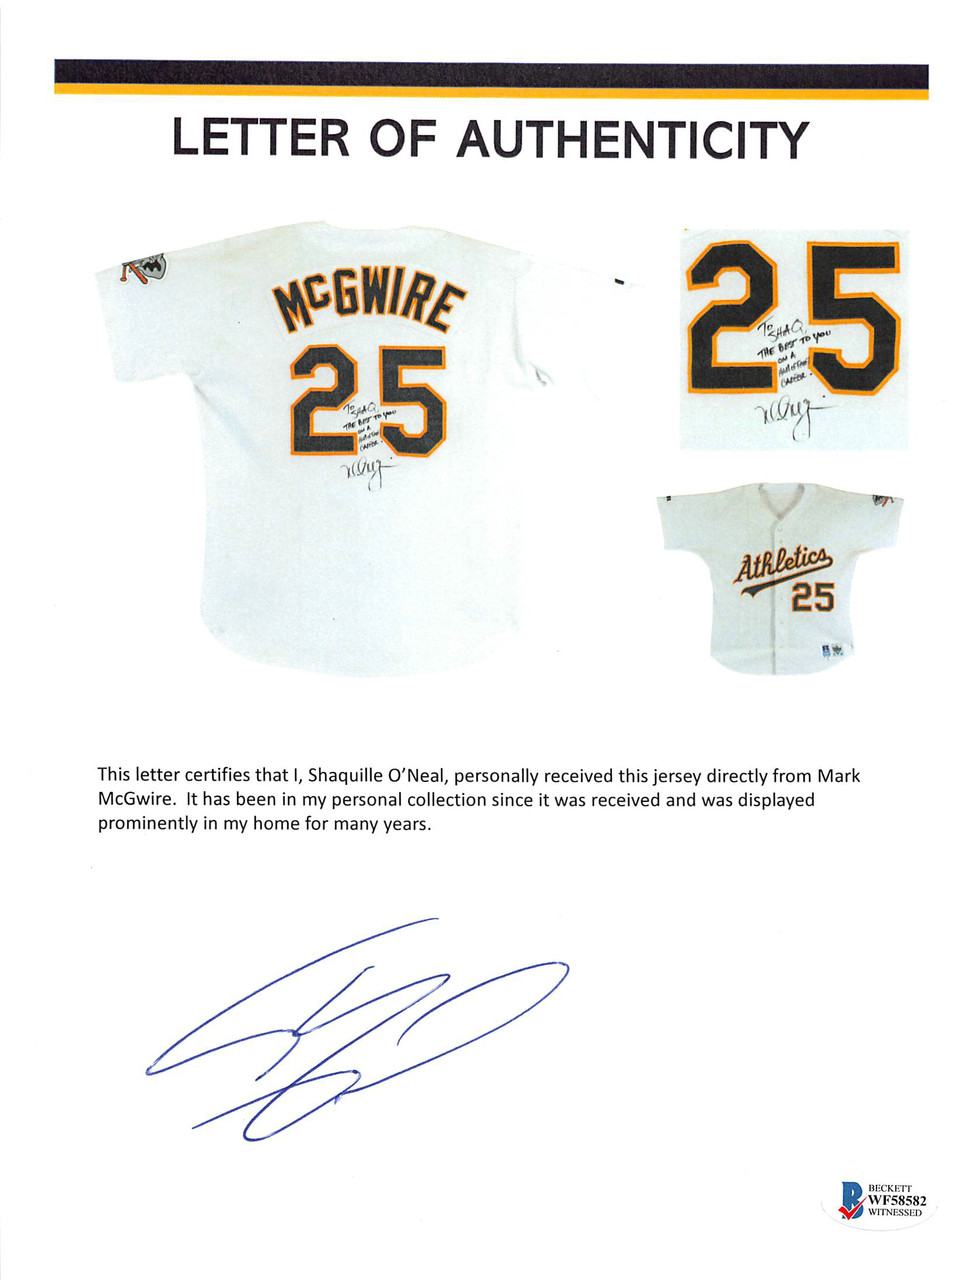 Mark McGwire Signed Cardinals Authentic Baseball Jersey PSA/DNA